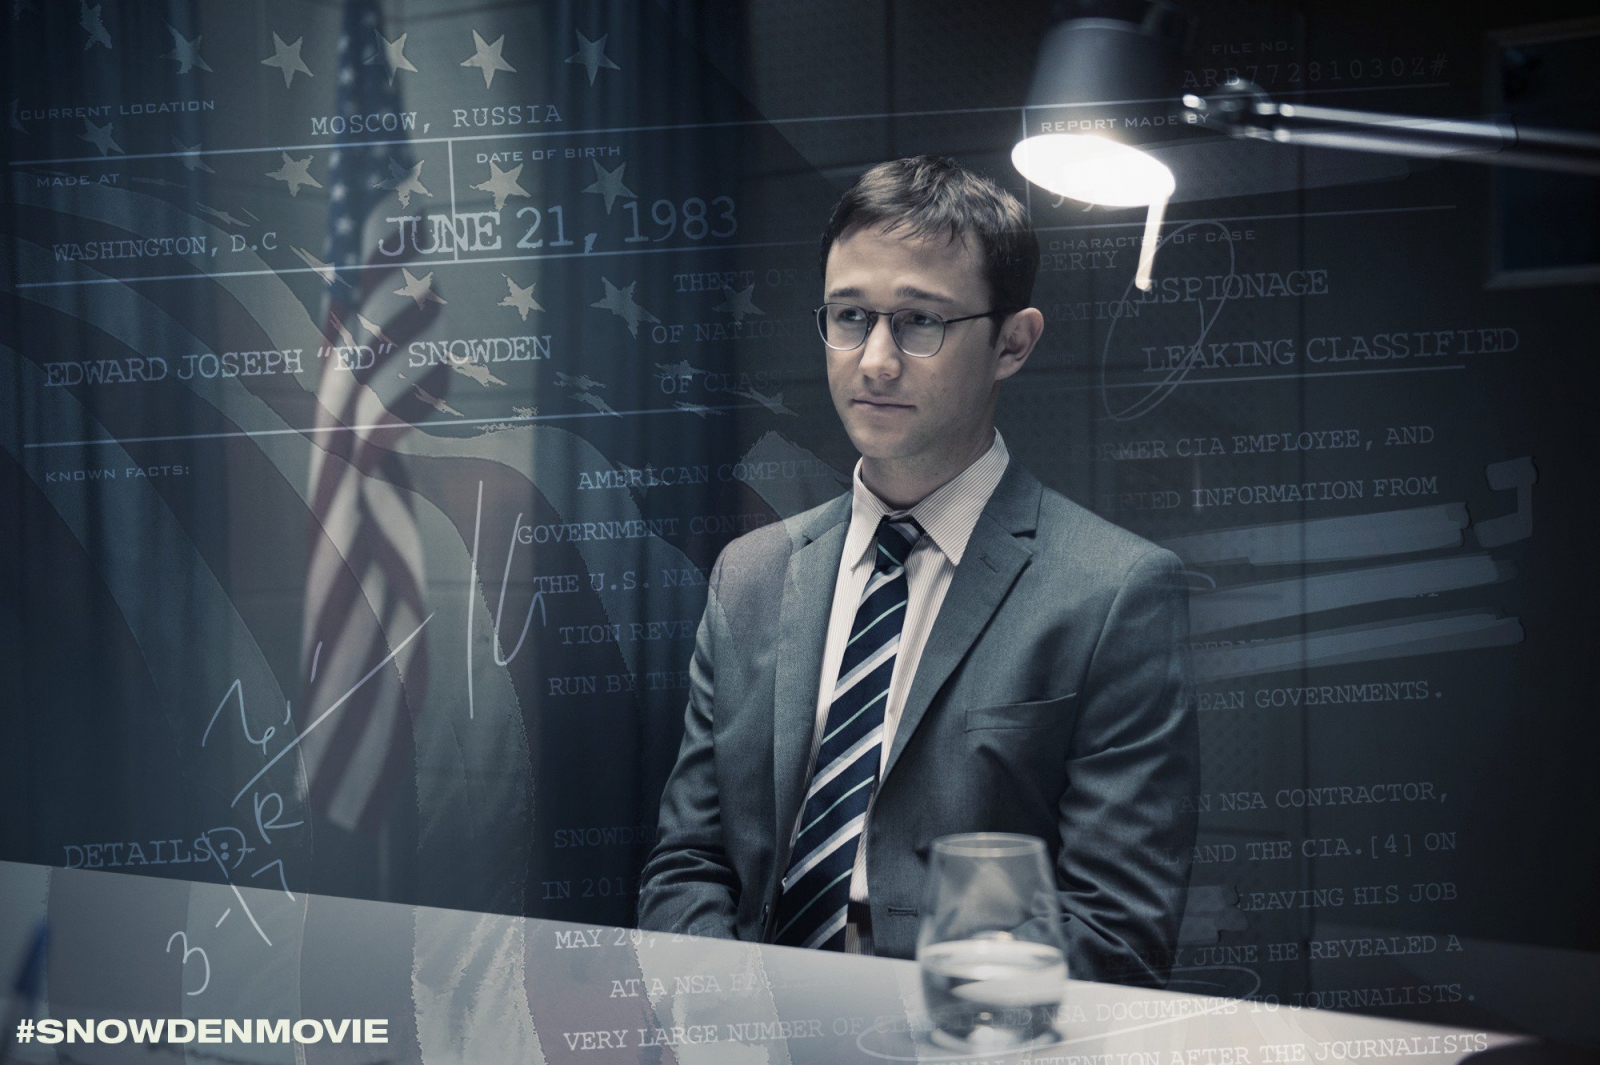 5-myths-about-edward-snowden-the-movie-reinforces